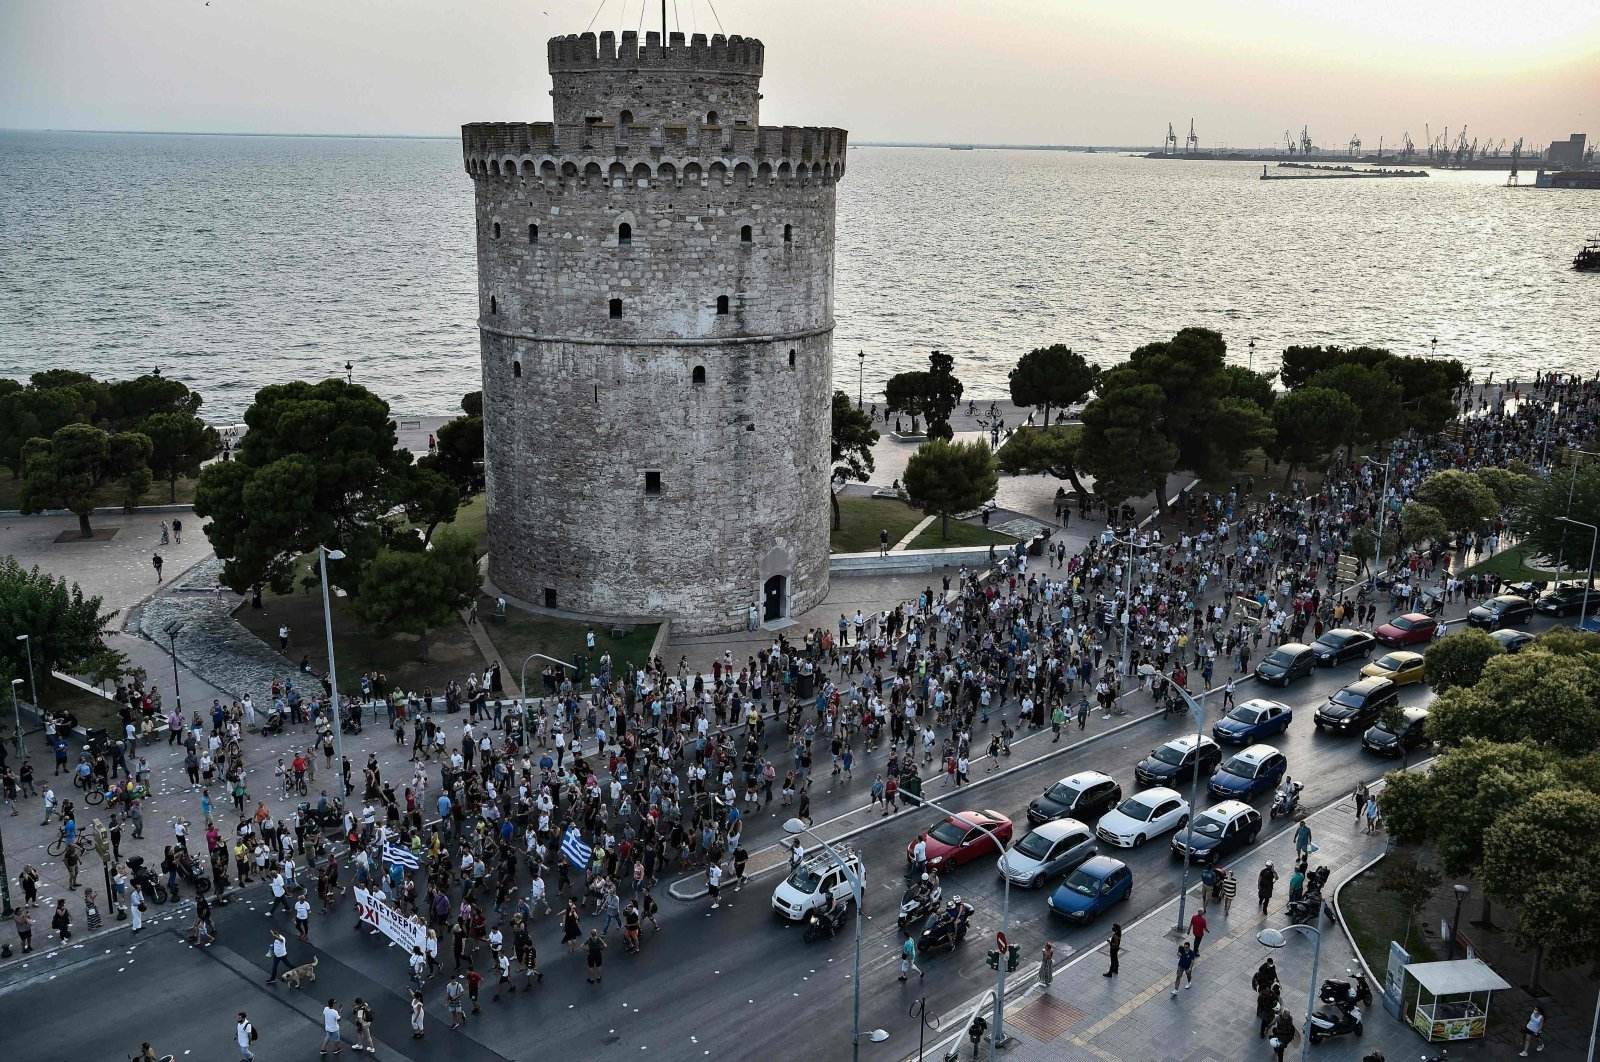 Anti-vaccine protesters taking part in a rally in Thessaloniki two days after the government announced mandatory COVID-19 vaccinations for all health workers, including those working in retirement homes, July 14, 2021. (AFP File Photo)